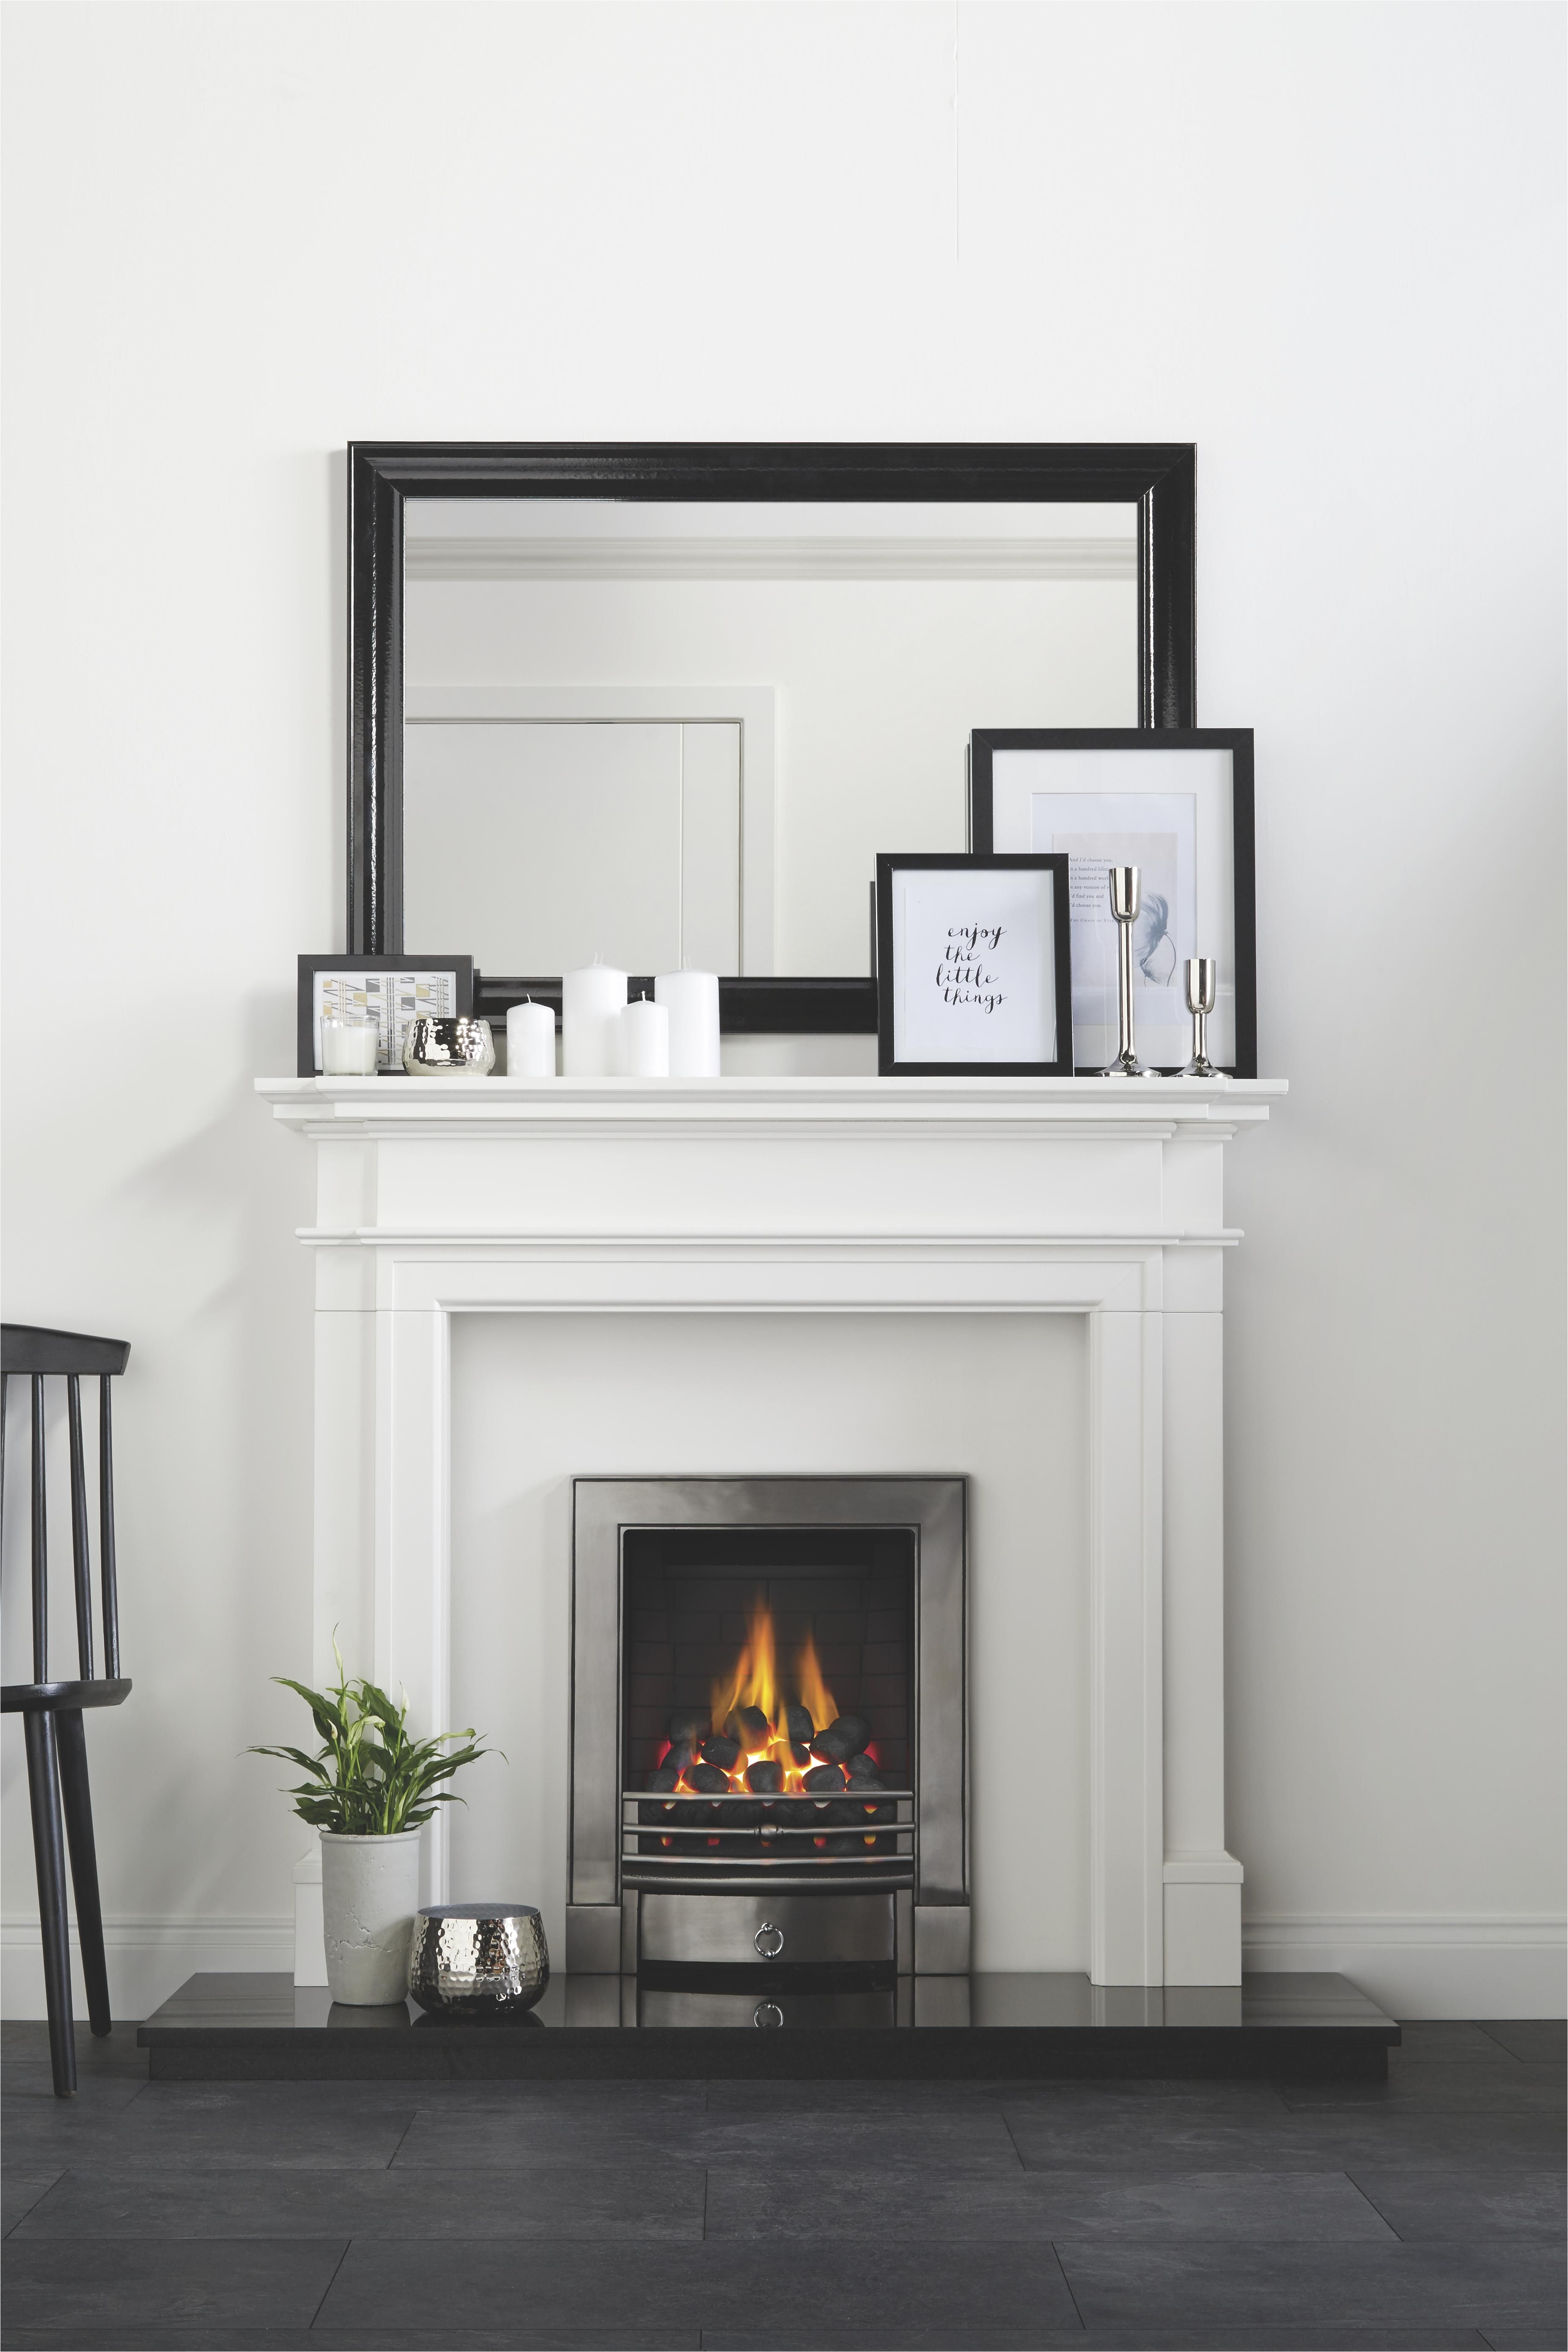 complement monochrome living with a sleek chrome electric fire and white surround